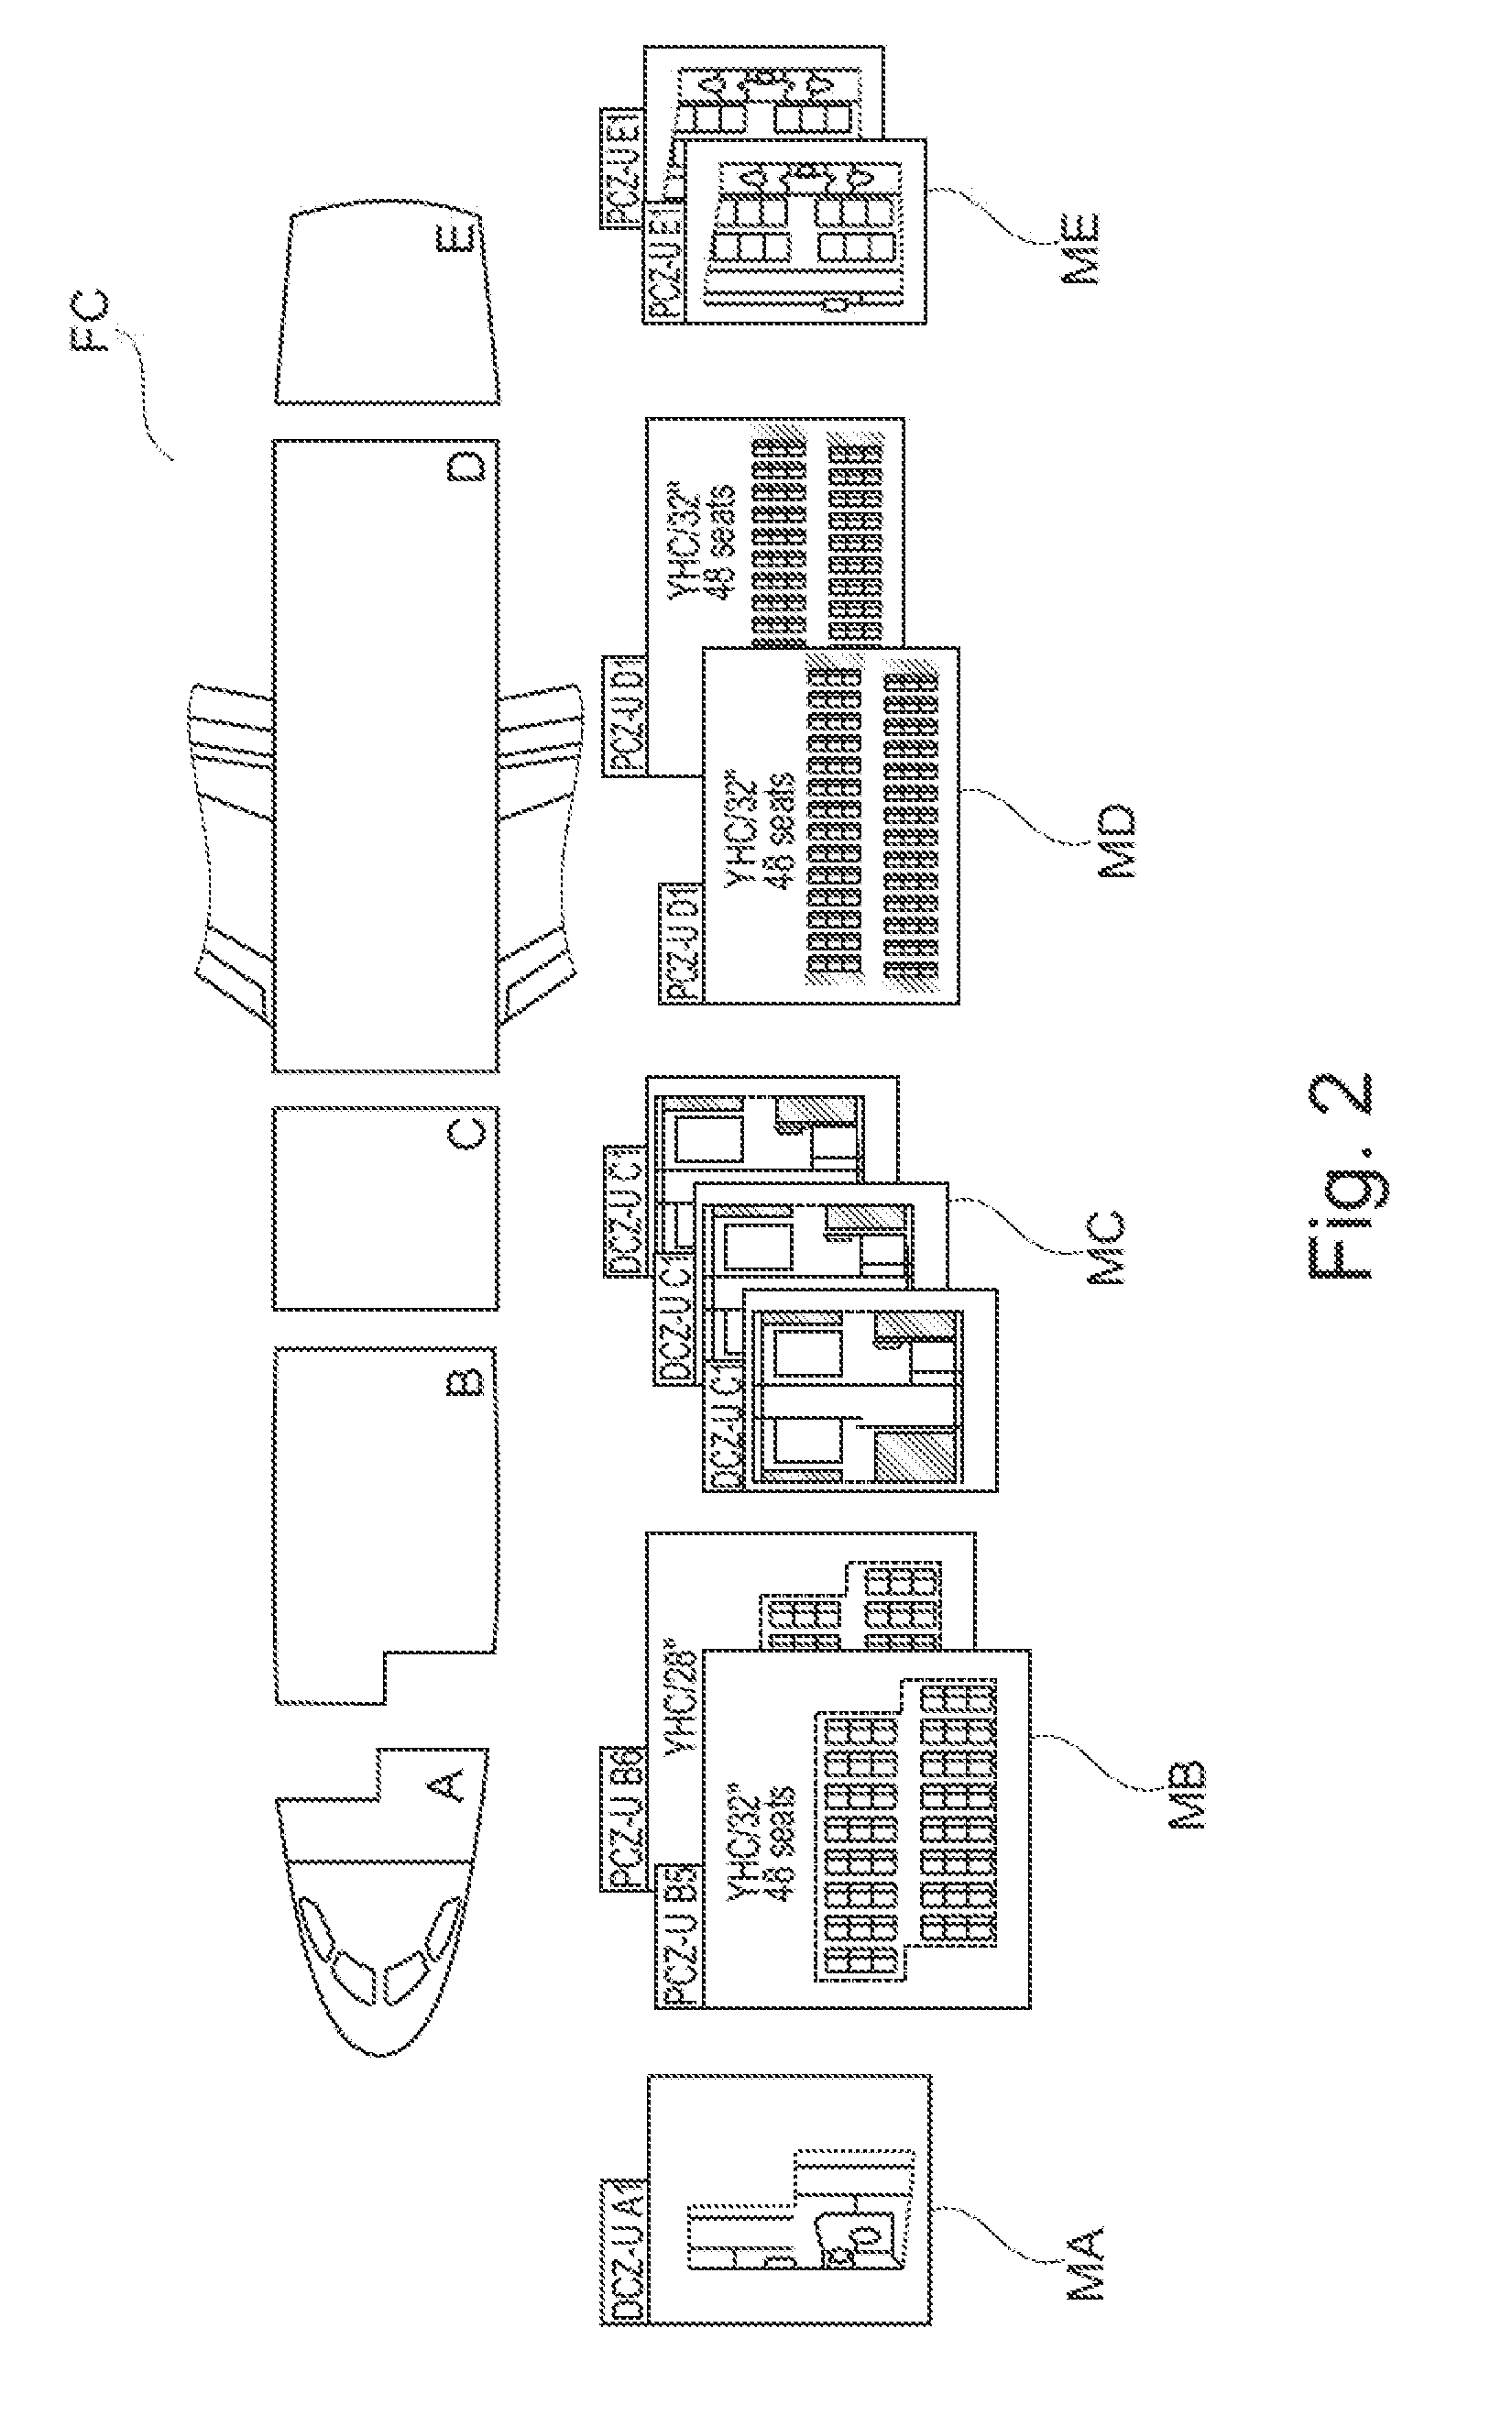 Configuration-controlled dynamic generation of product data for complex products